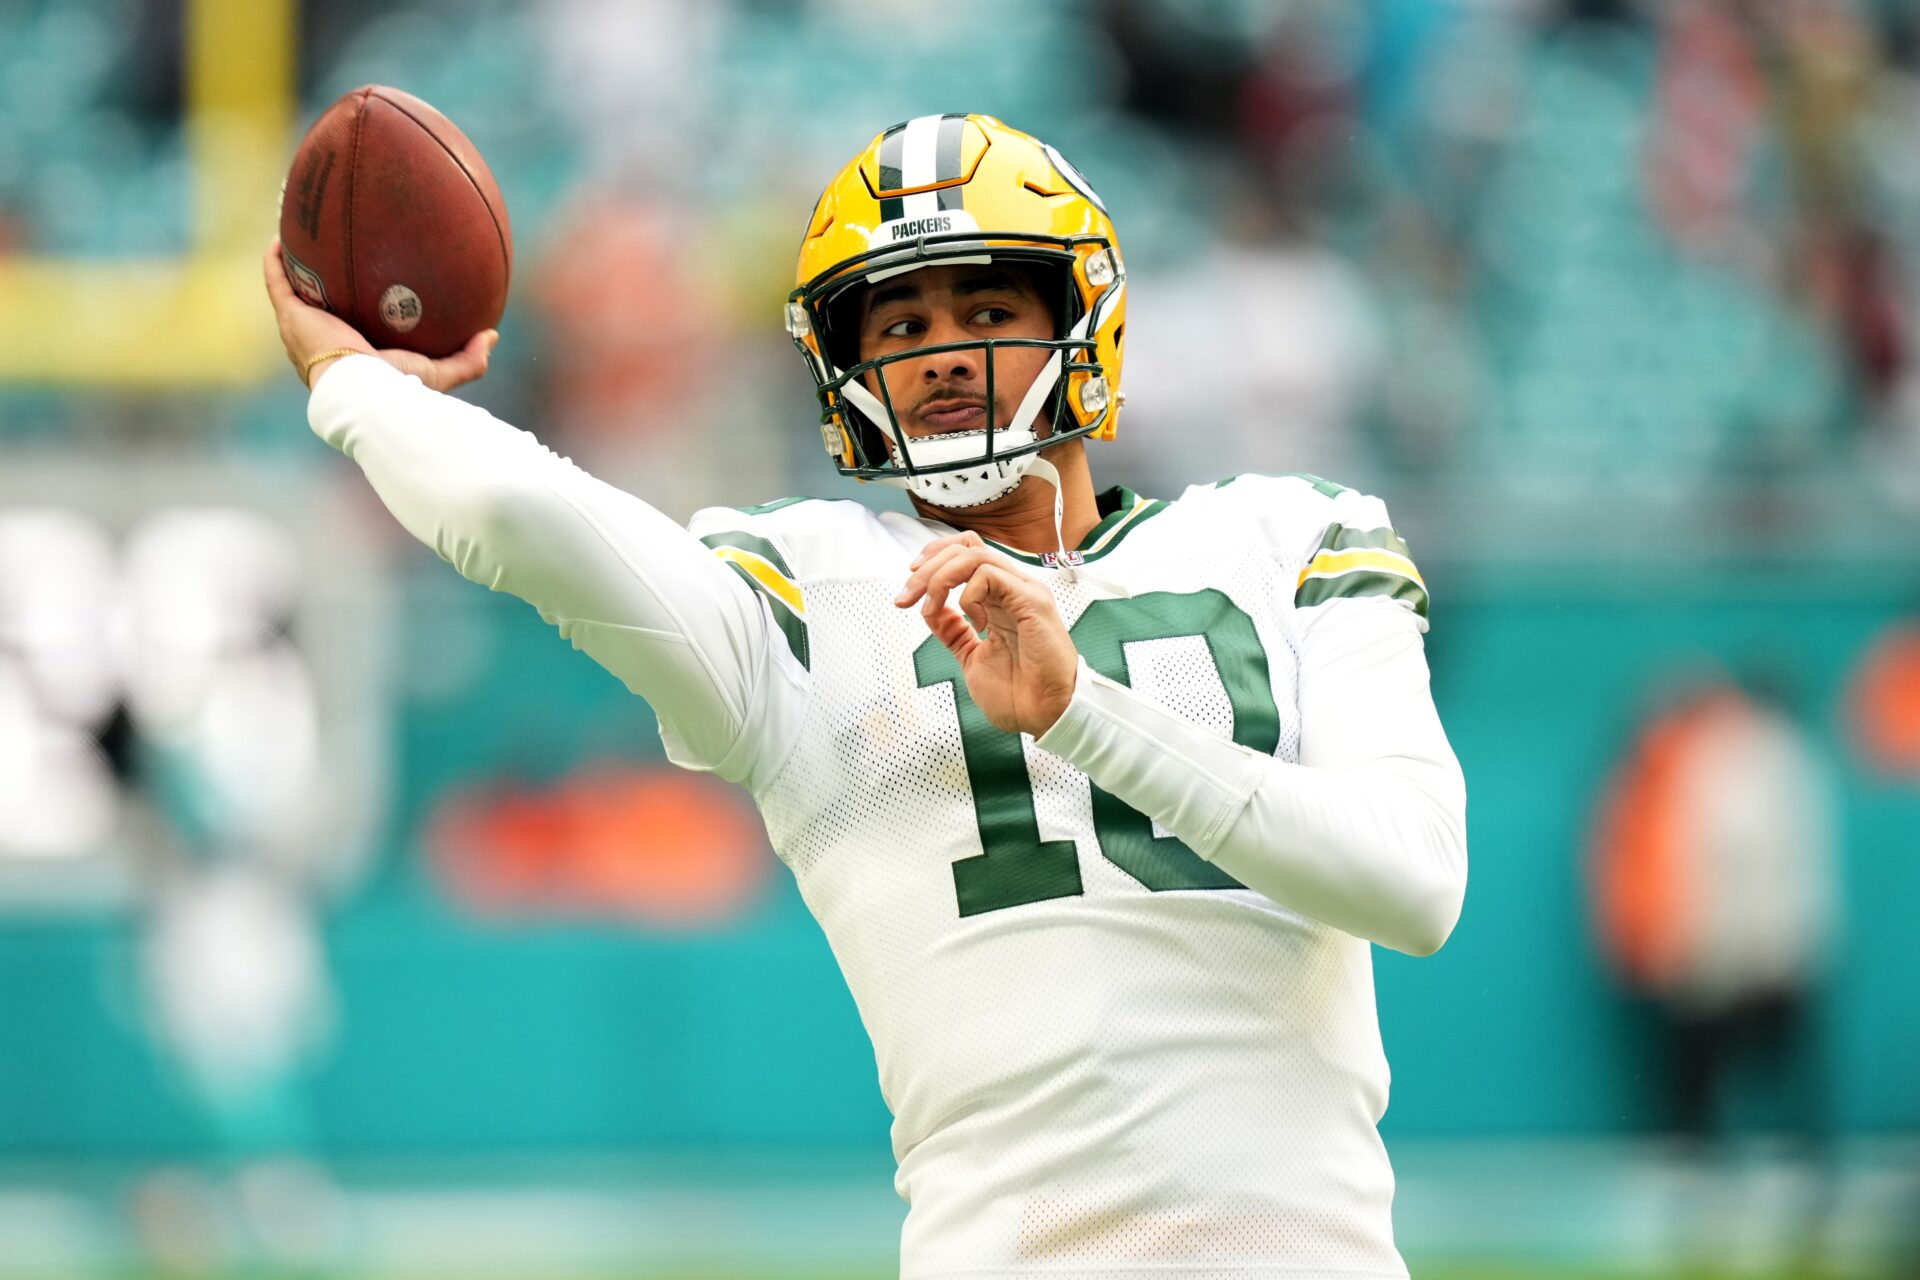 Green Bay Packers QB Jordan Love throwing a pass in focus in front of a blurry background. He's wearing a white jersey with a white long-sleeve underneath and a yellow helmet.